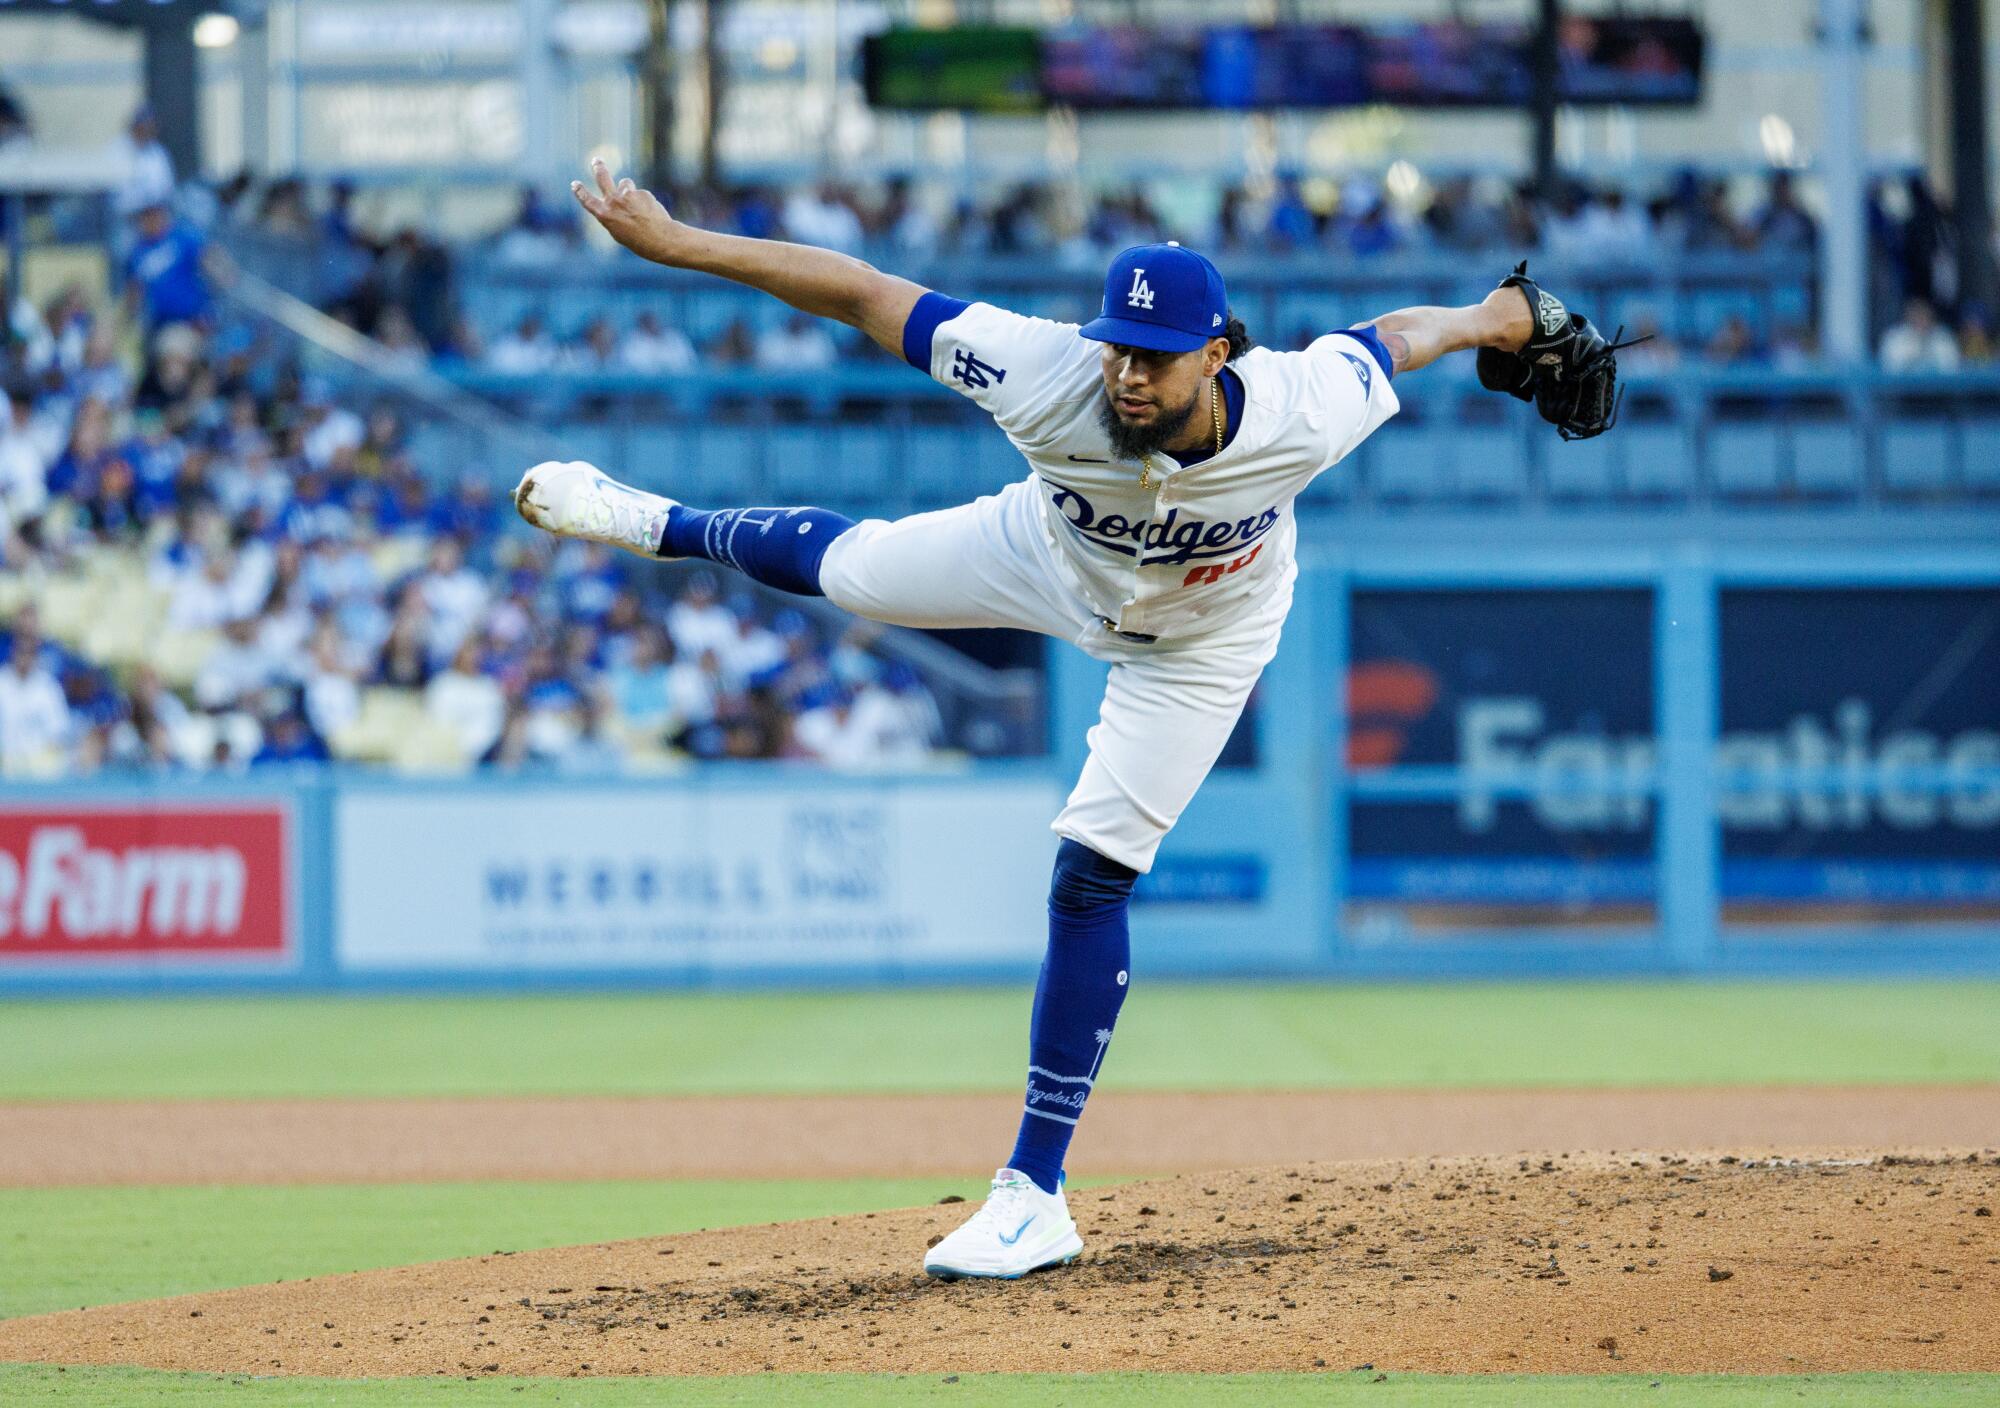 Dodgers pitcher Yohan Ramírez pitches in relief in the fifth inning against the Royals at Dodger Stadium on June 15.